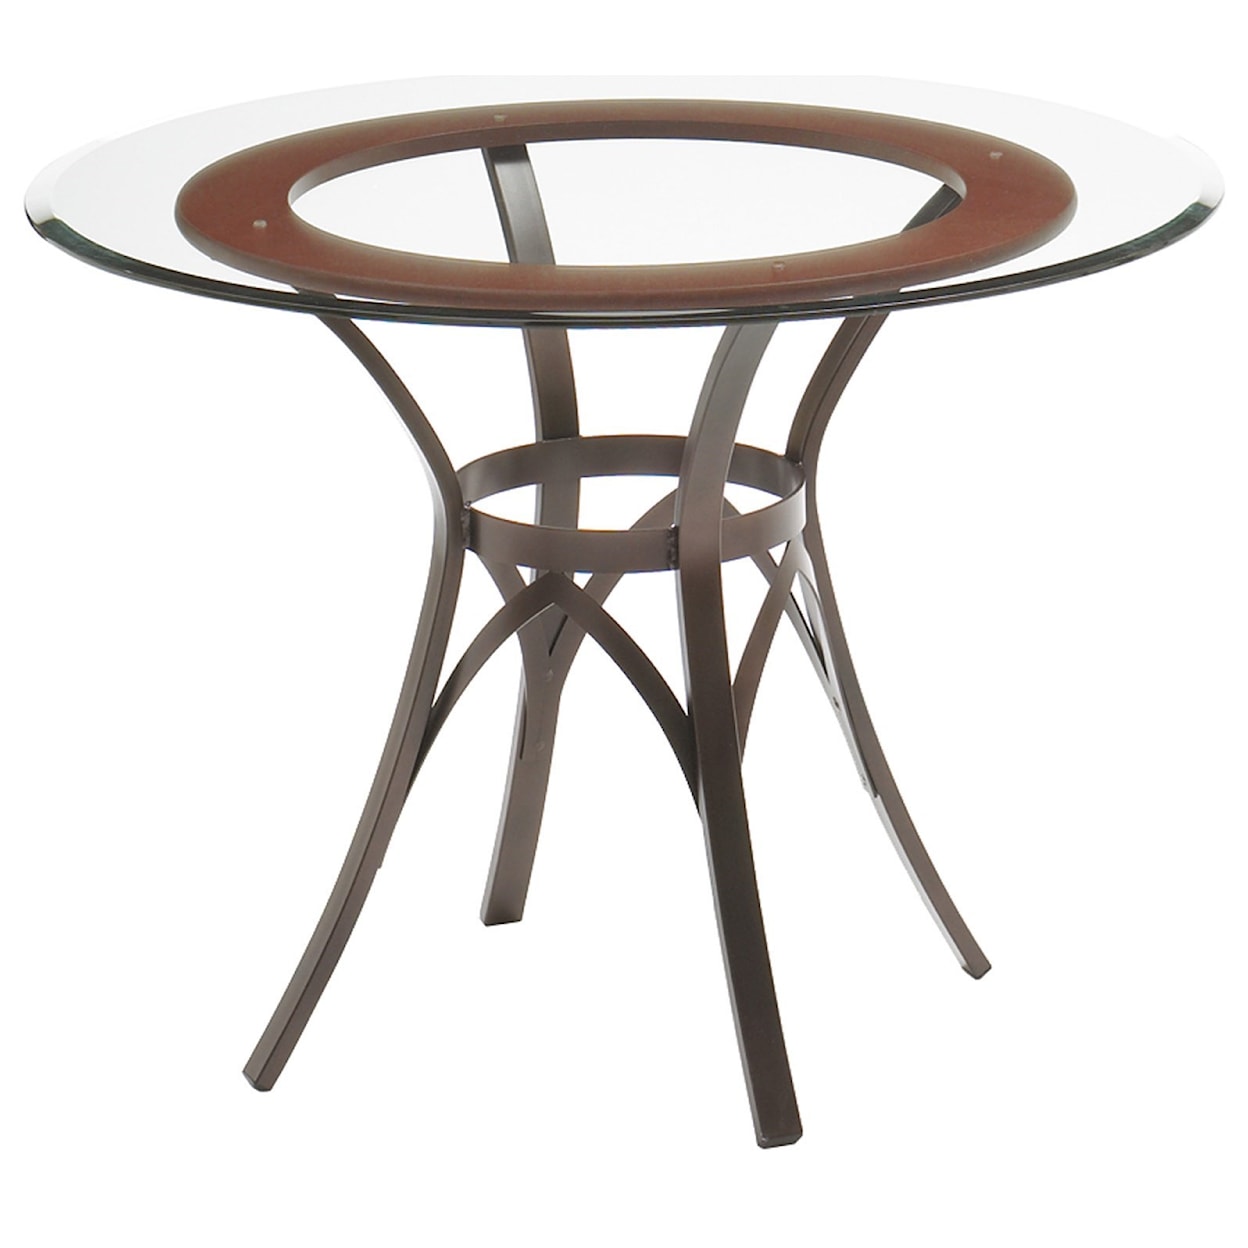 Amisco Countryside Kai Table w/ Wood Ring Insert and Glass Top